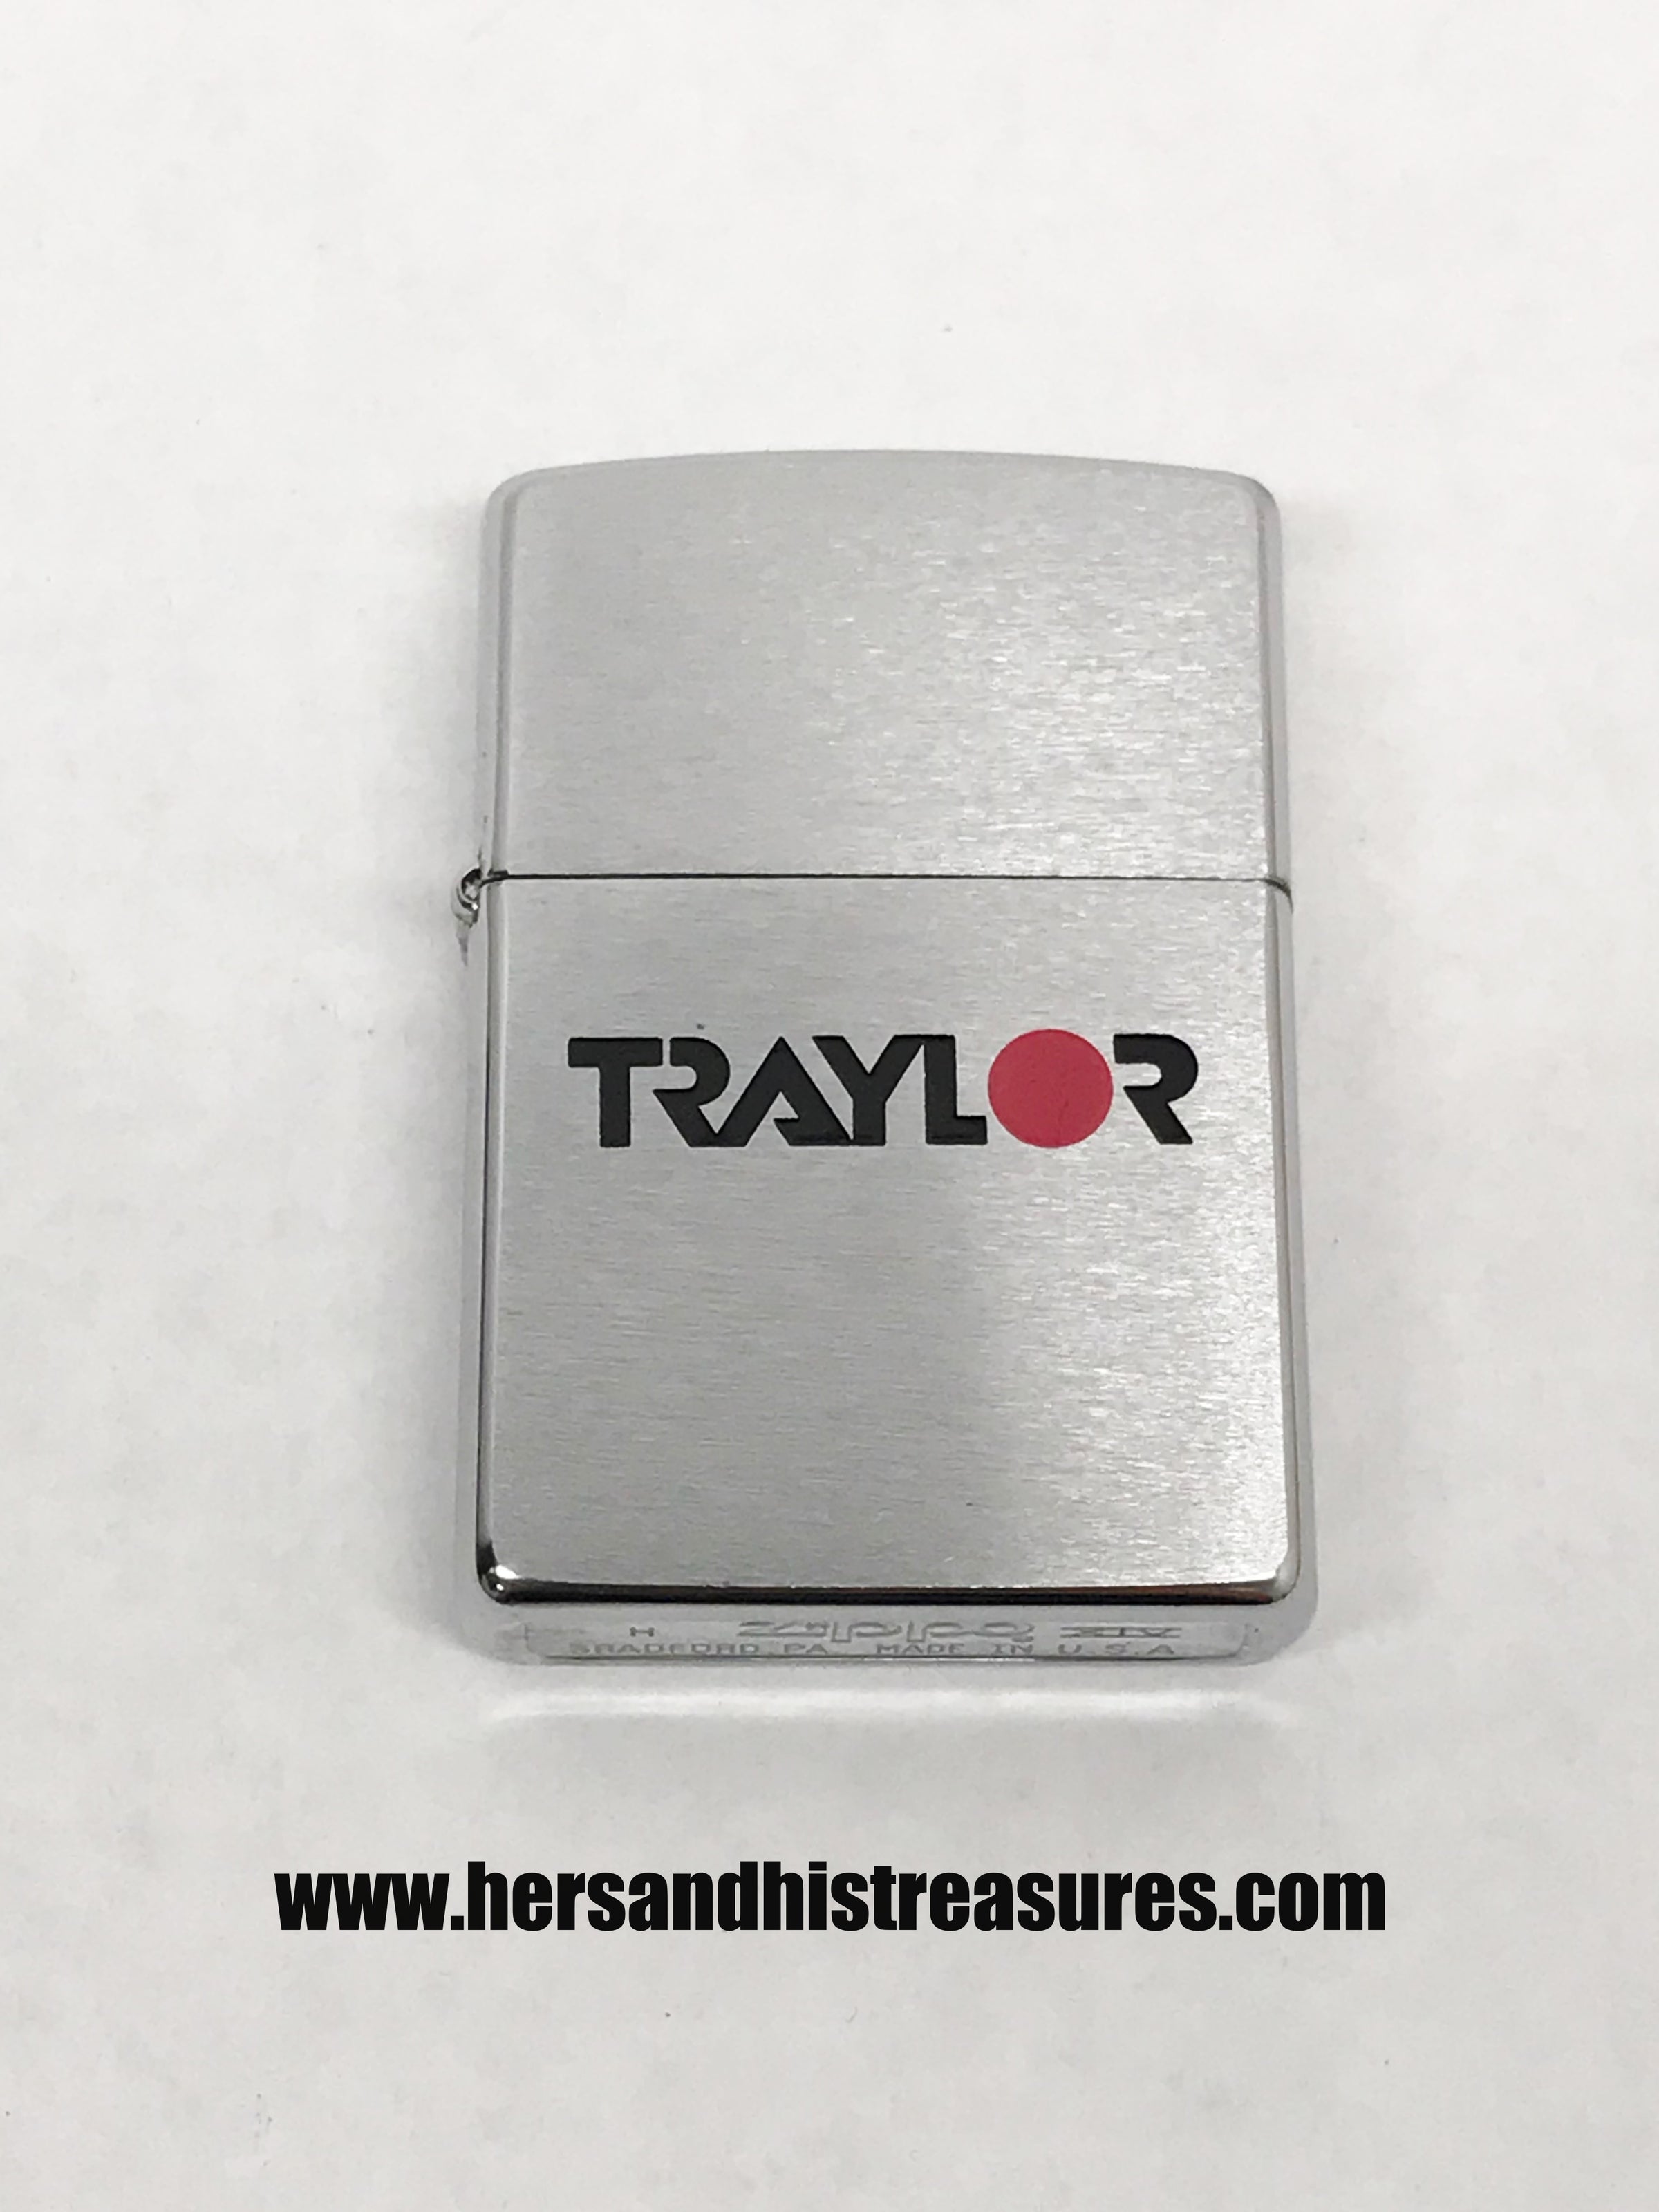 www.hersandhistreasures.com/products/1998-xiv-traylor-brothers-civil-engineers-advertising-zippo-lighter